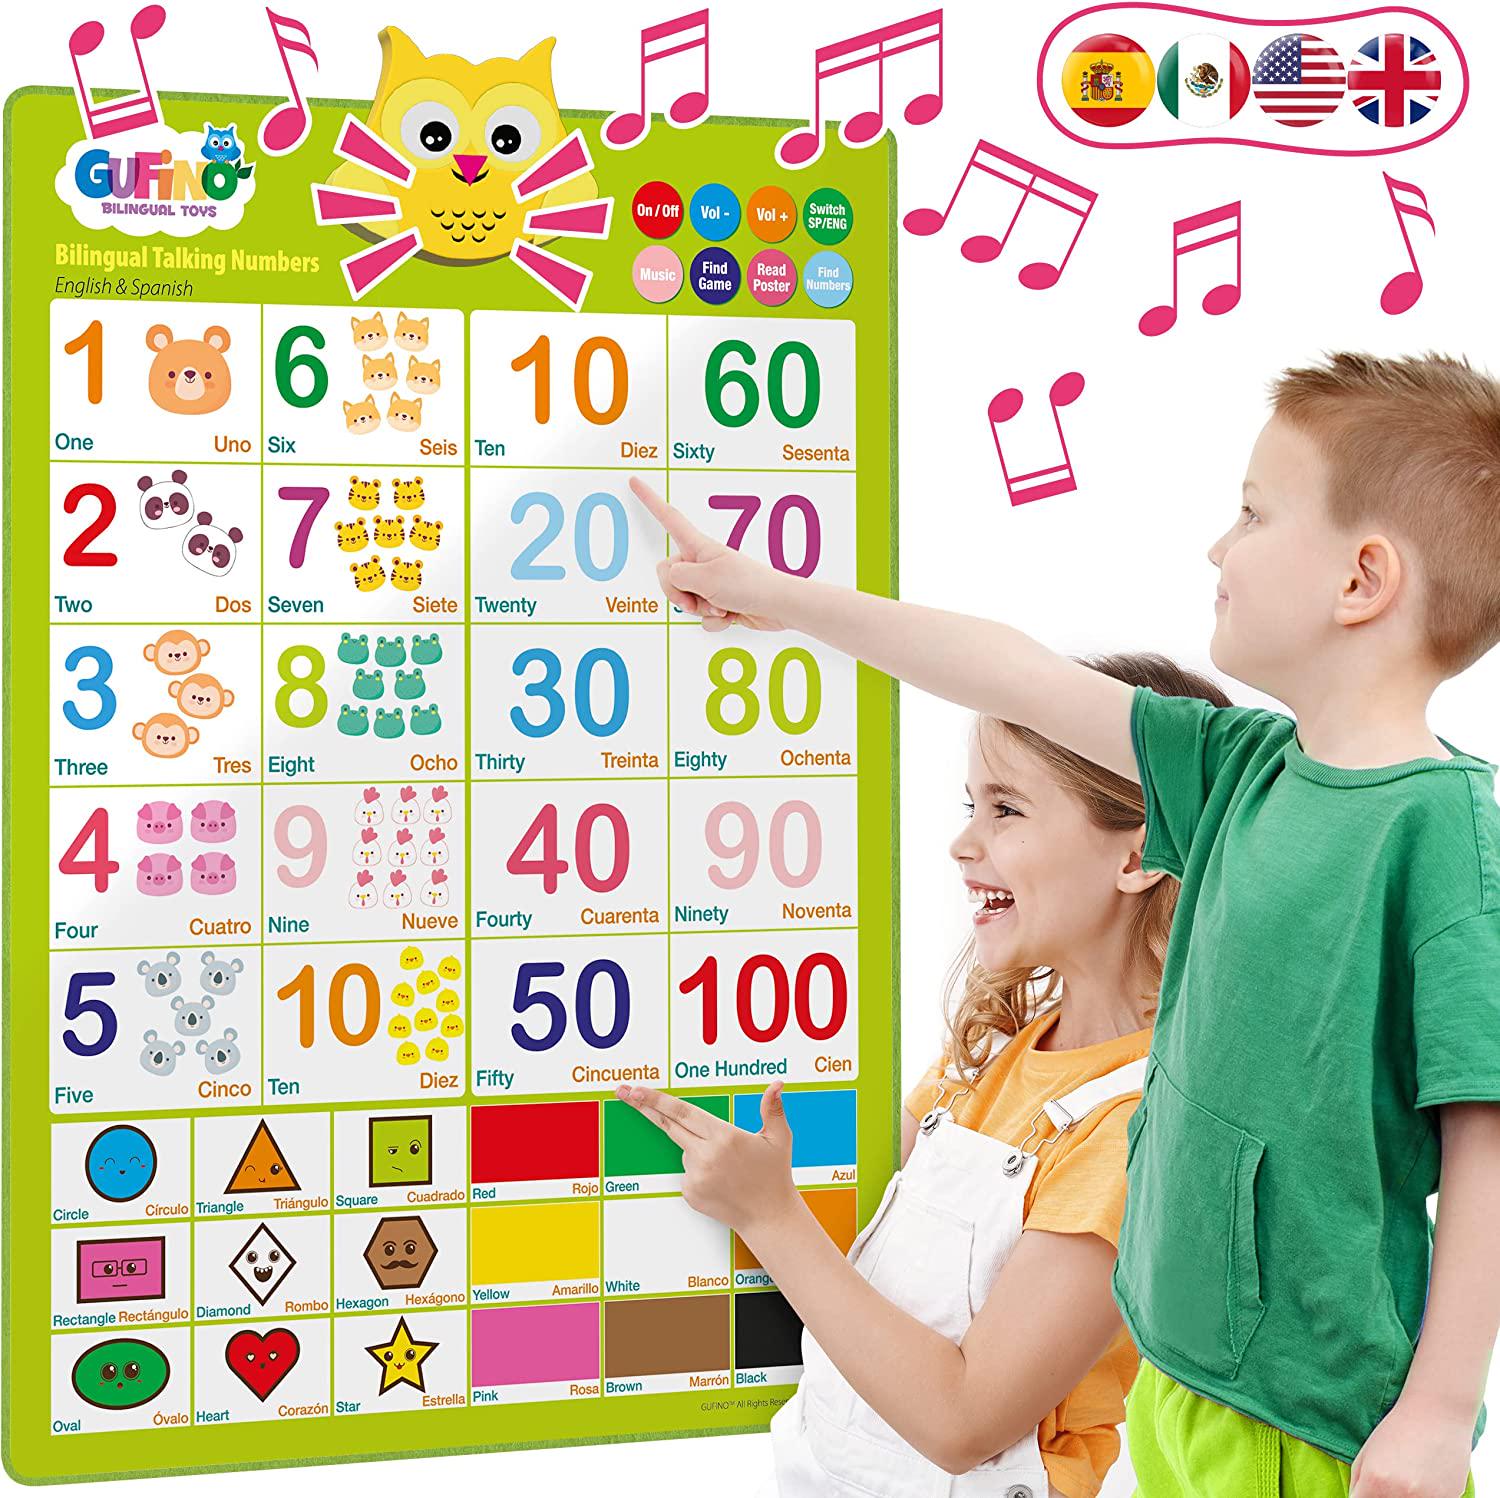 LVAP, LVAP Talking Number Poster for Toddlers - English and Spanish Learning for Toddlers. Numbers, Colors, Songs! Educational Toys for 2 Year Old Kids and Older. Best Learning and Education Toys